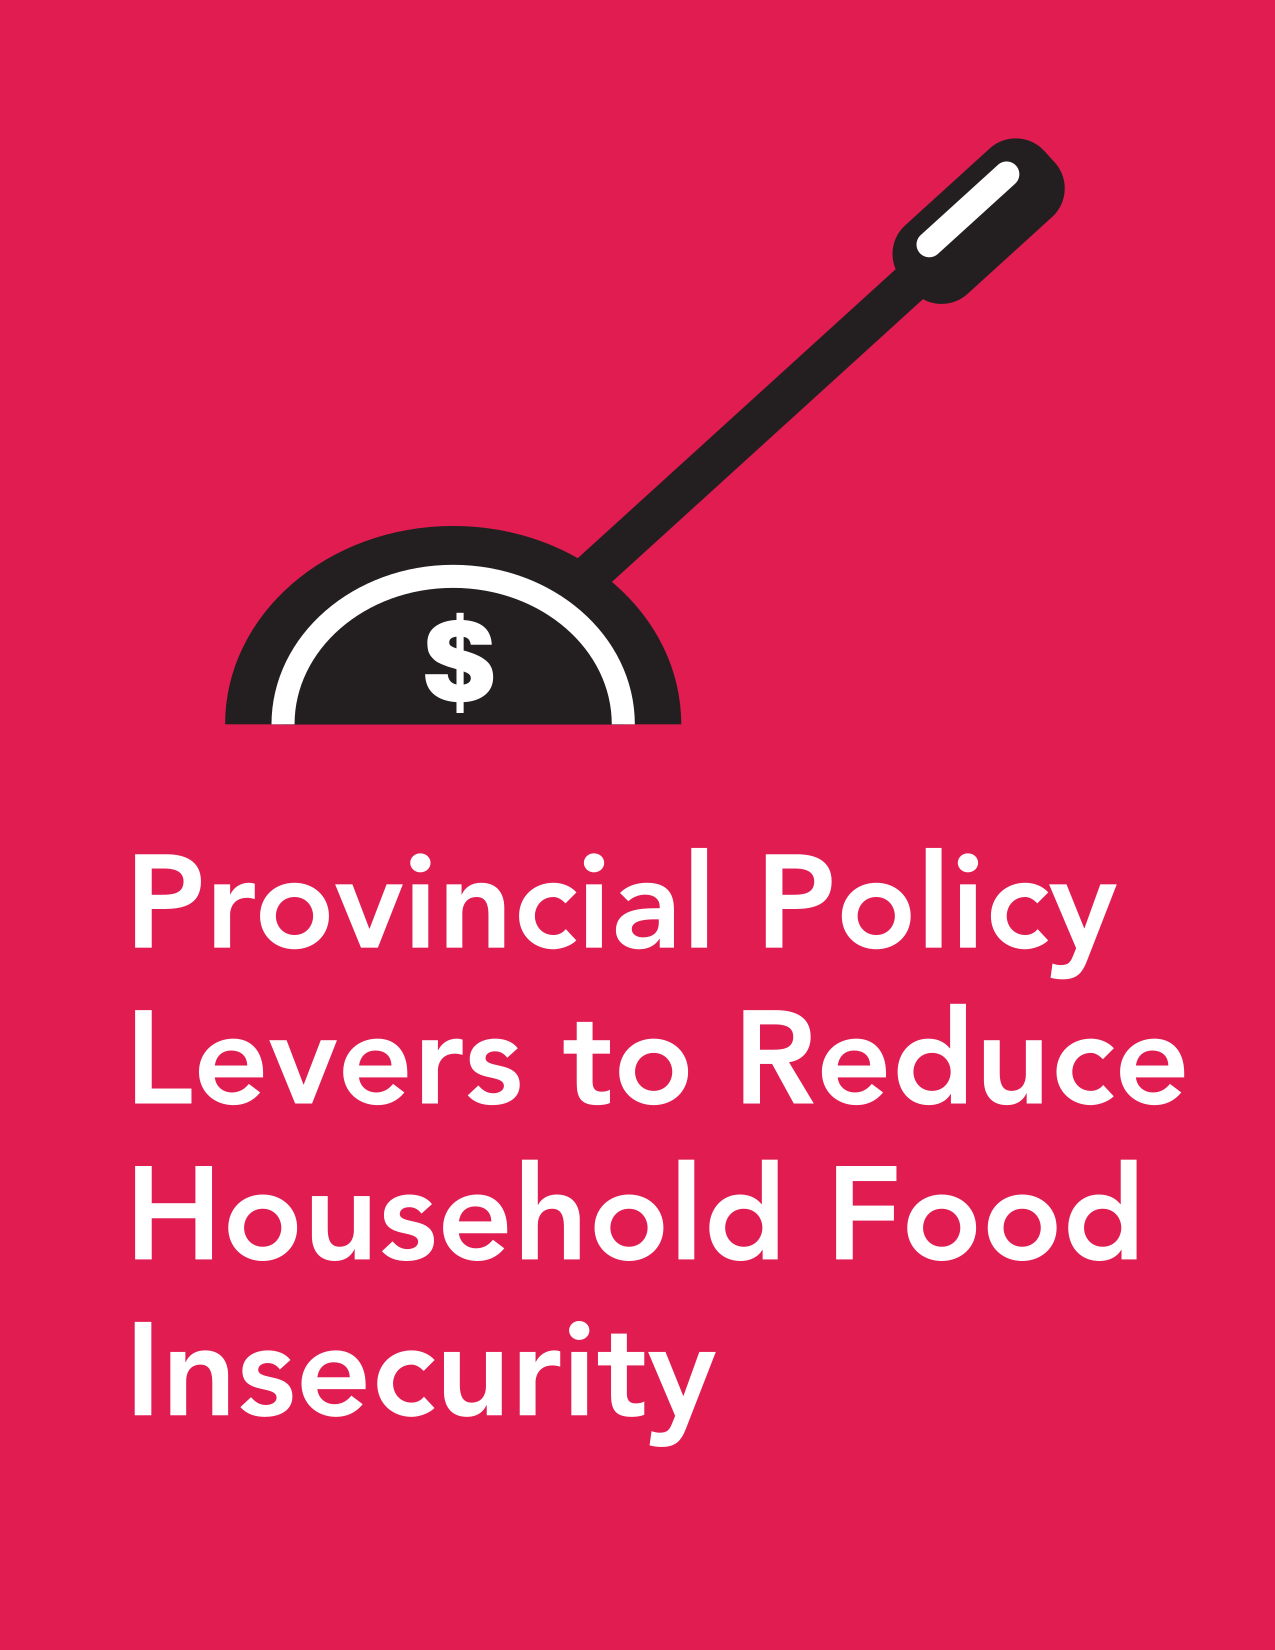 Provincial Policy Levers to Reduce Household Food Insecurity